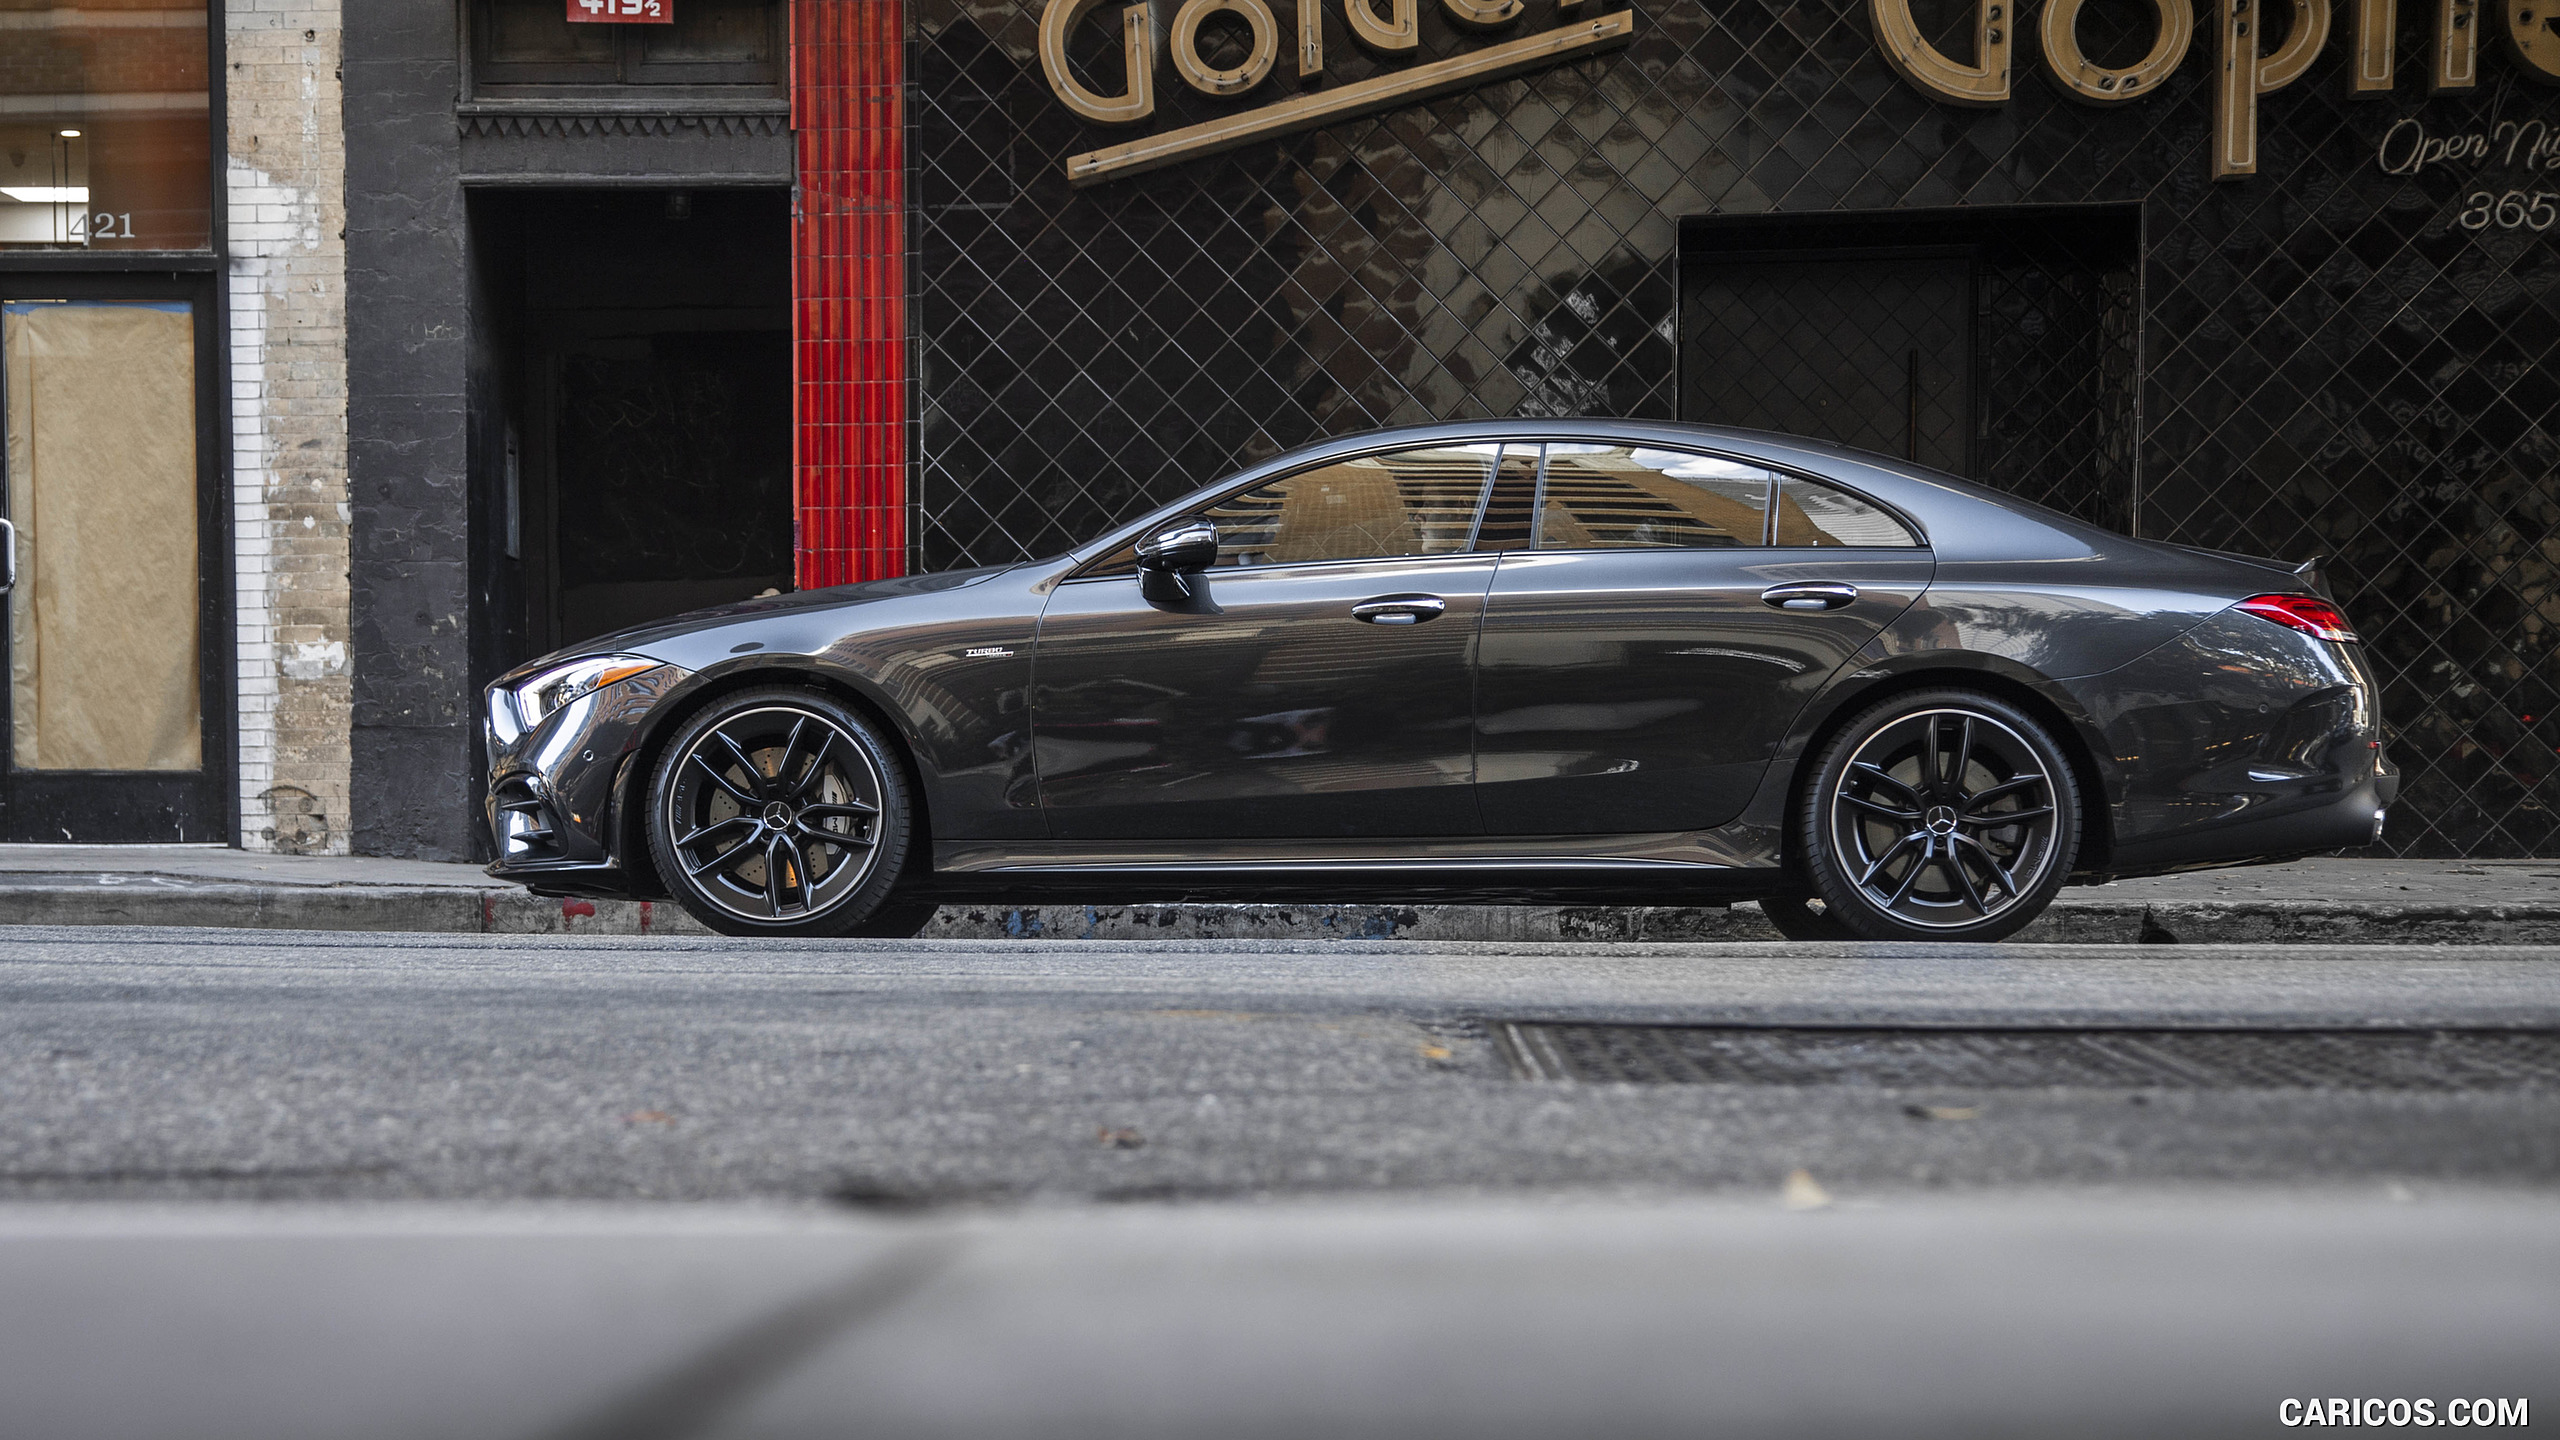 2019 Mercedes-AMG CLS 53 4MATIC+ (US-Spec) - Side, #32 of 84